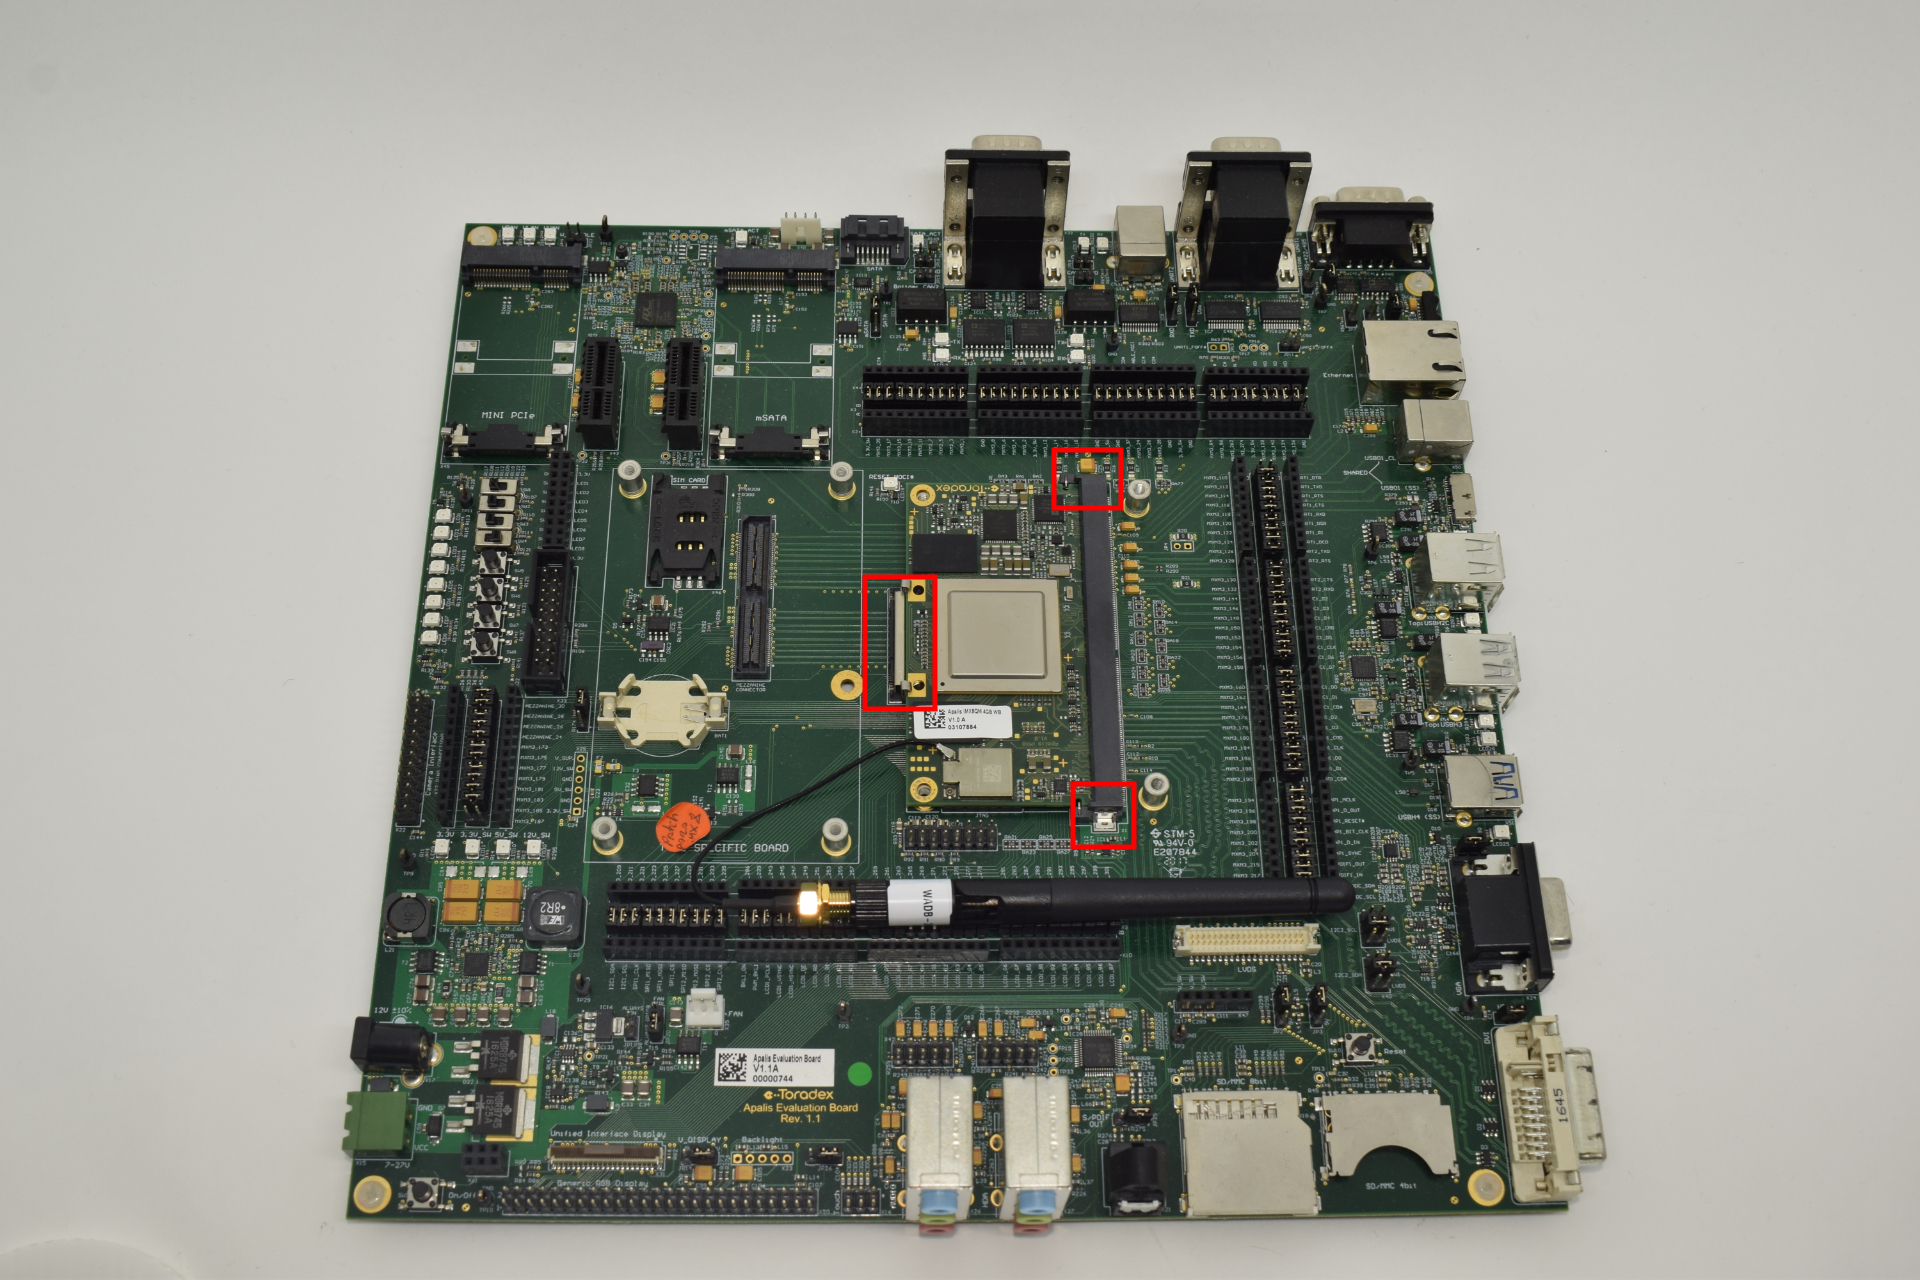 Computer on module connected to the Apalis Evaluation Board